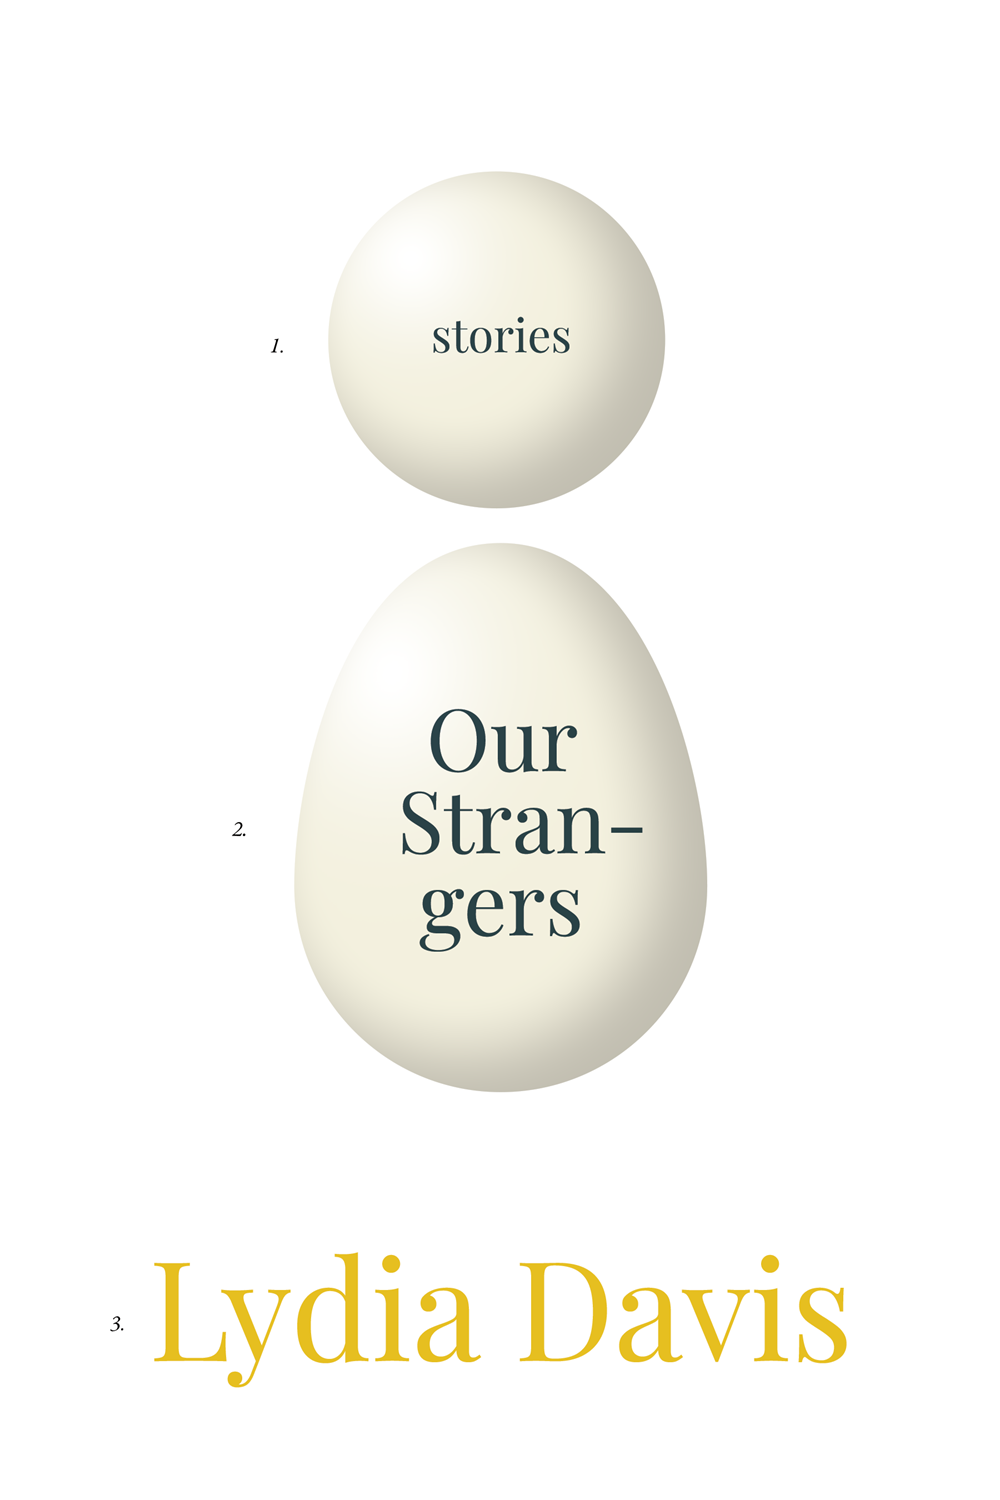 Our Strangers: Stories by Lydia Davis (10/3/23)